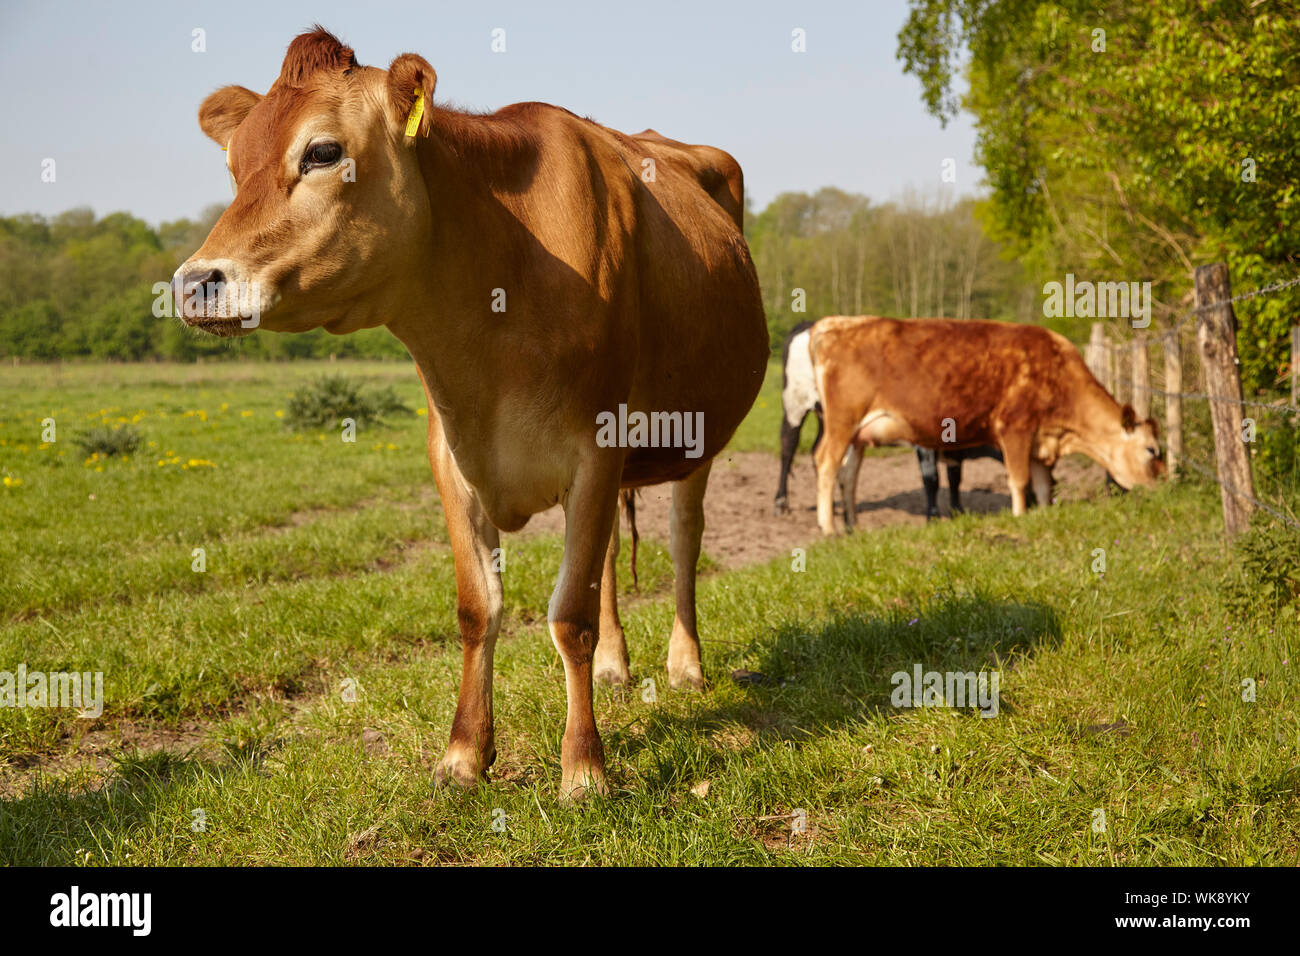 Jersey dairy cows ip pasture Stock Photo